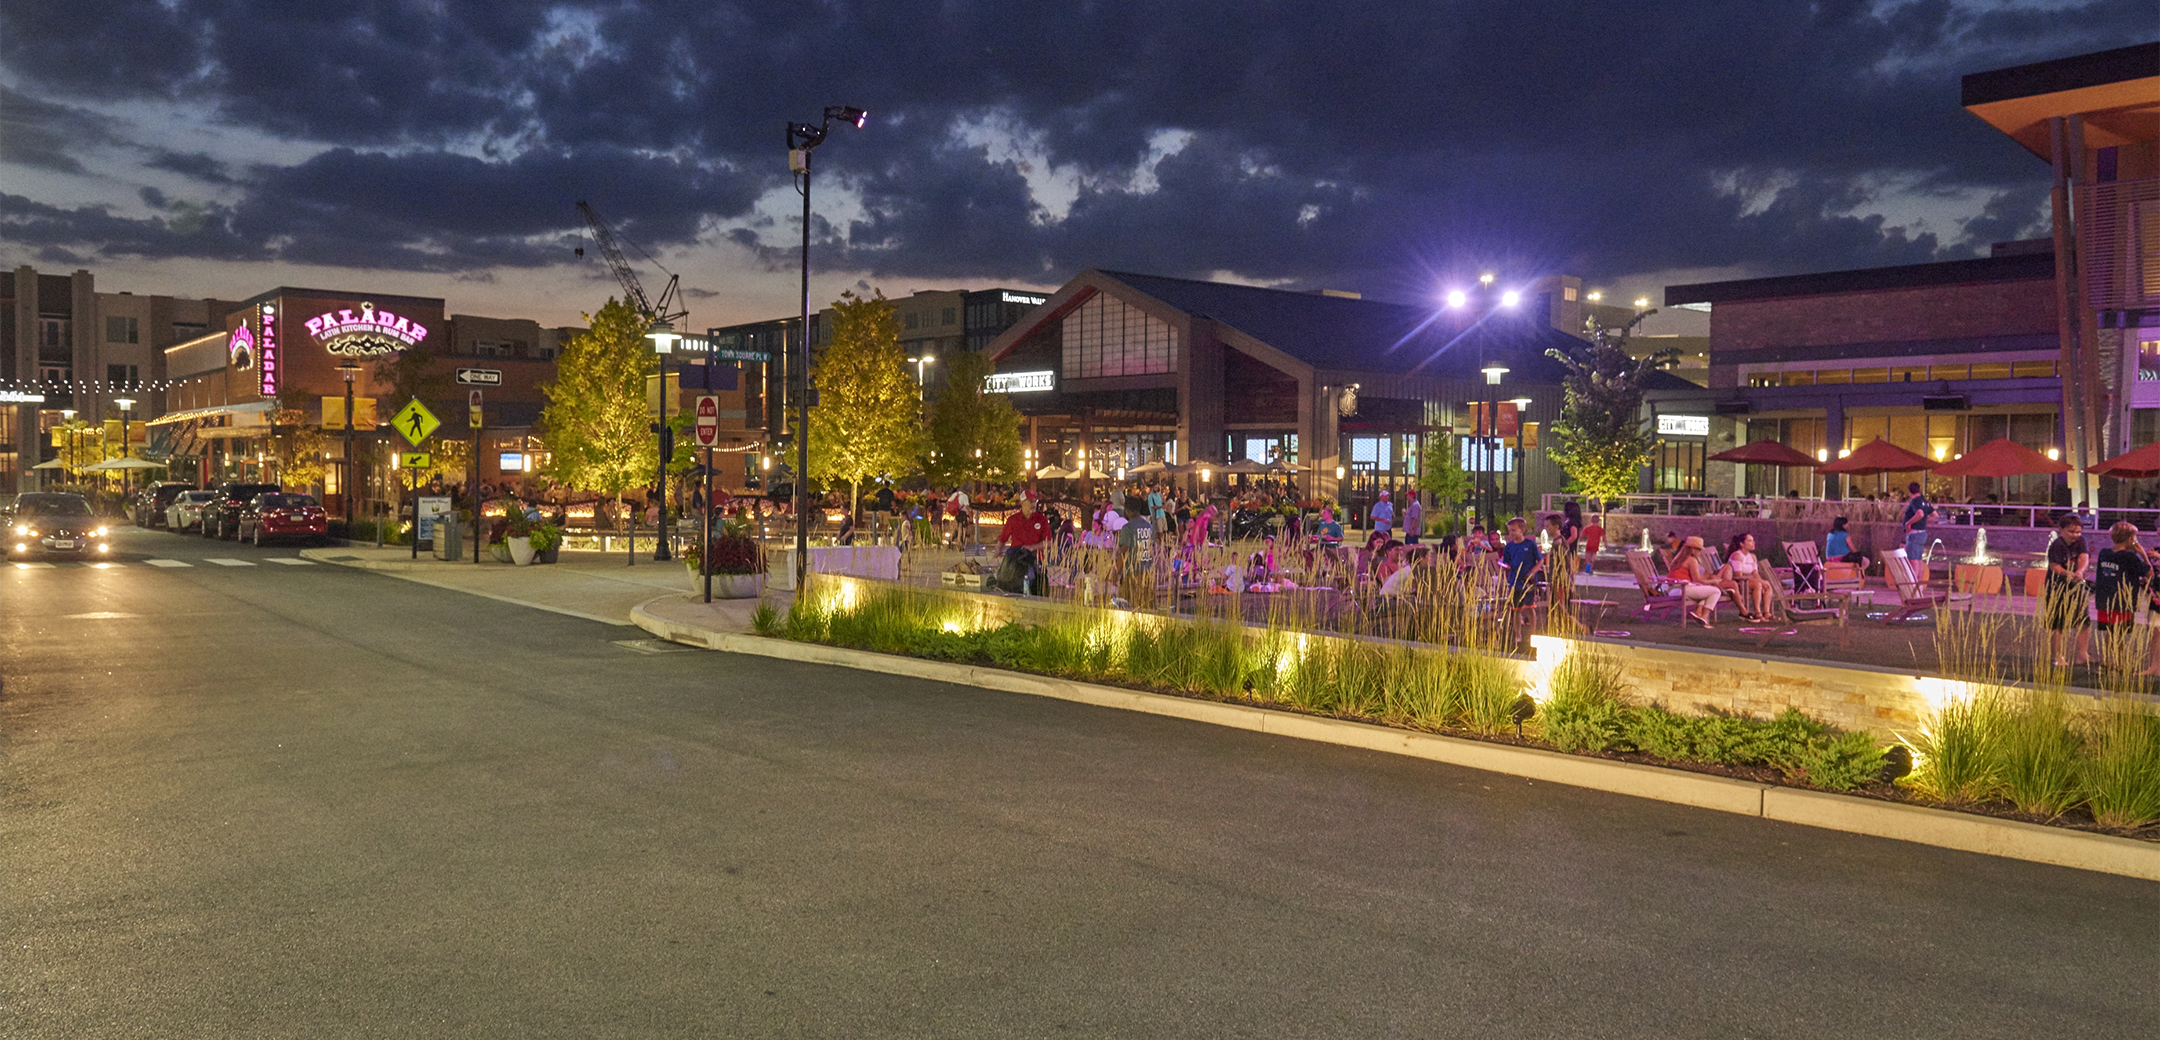 An nighttime exterior view of the KOP Center showcasing the driveway, people sitting on chairs in the center square and grass and tree décor.